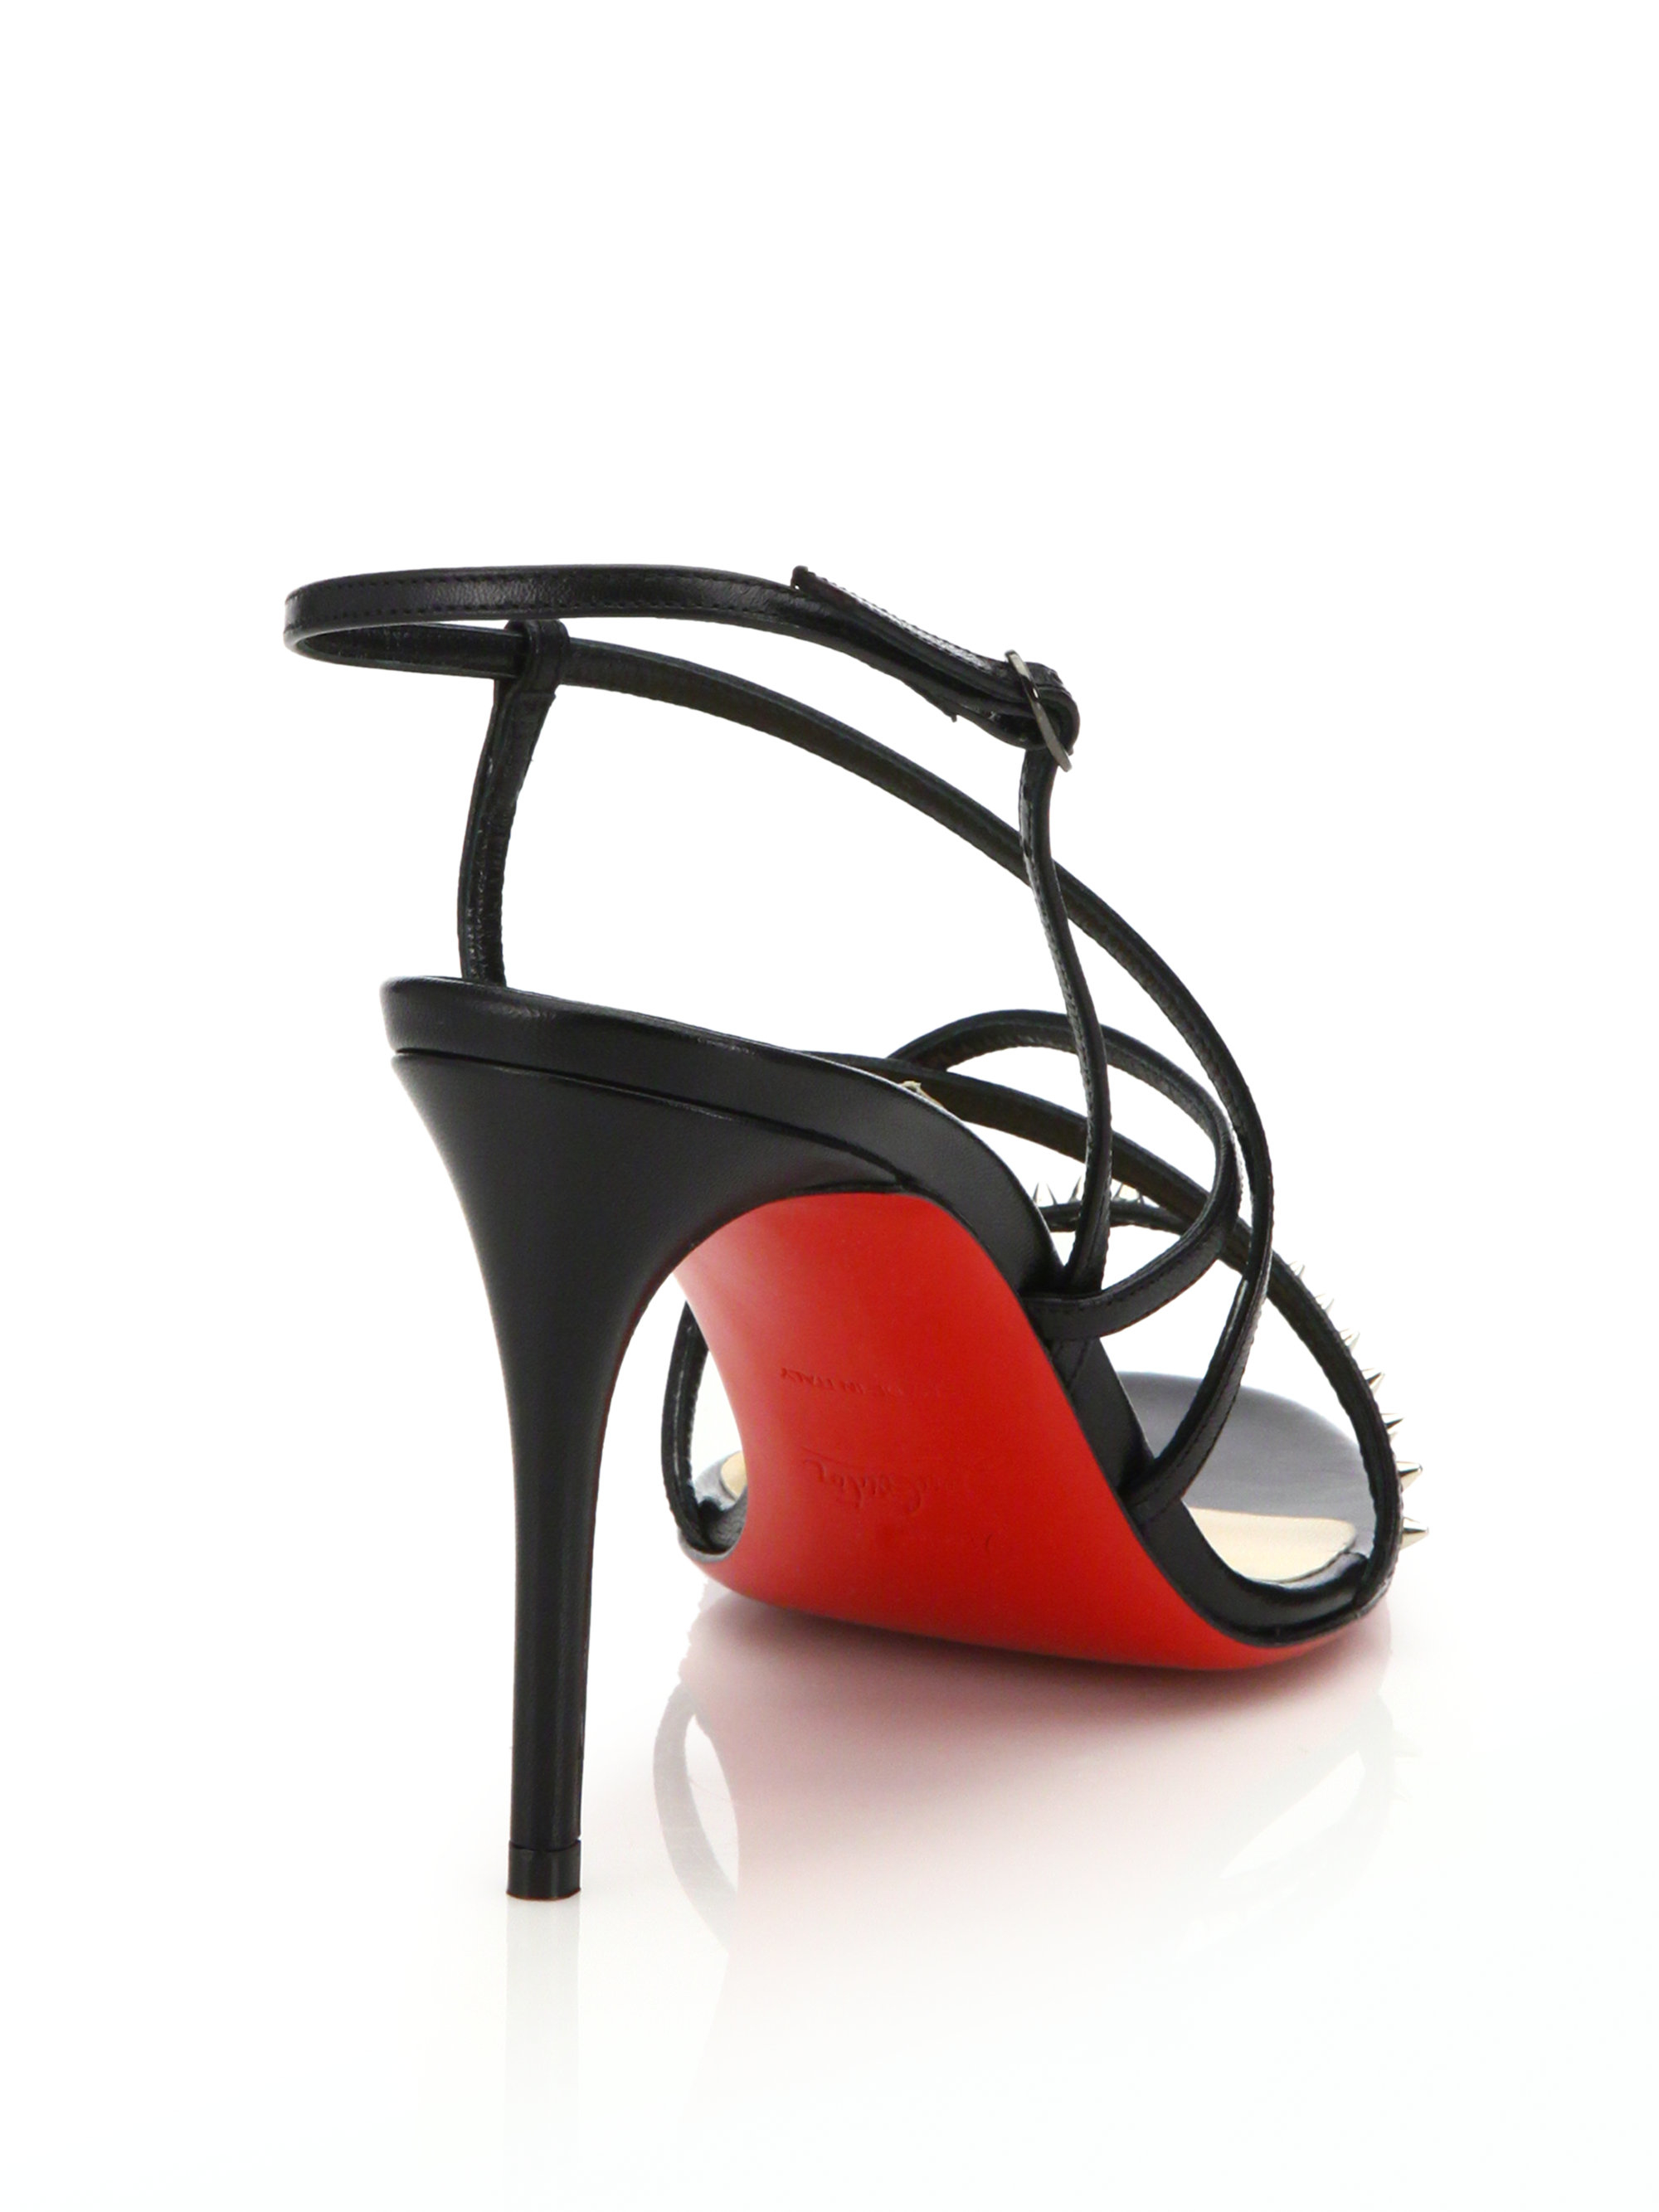 best replica christian louboutin shoes website - Christian louboutin Leather Studded Strappy Sandals in Red (black ...